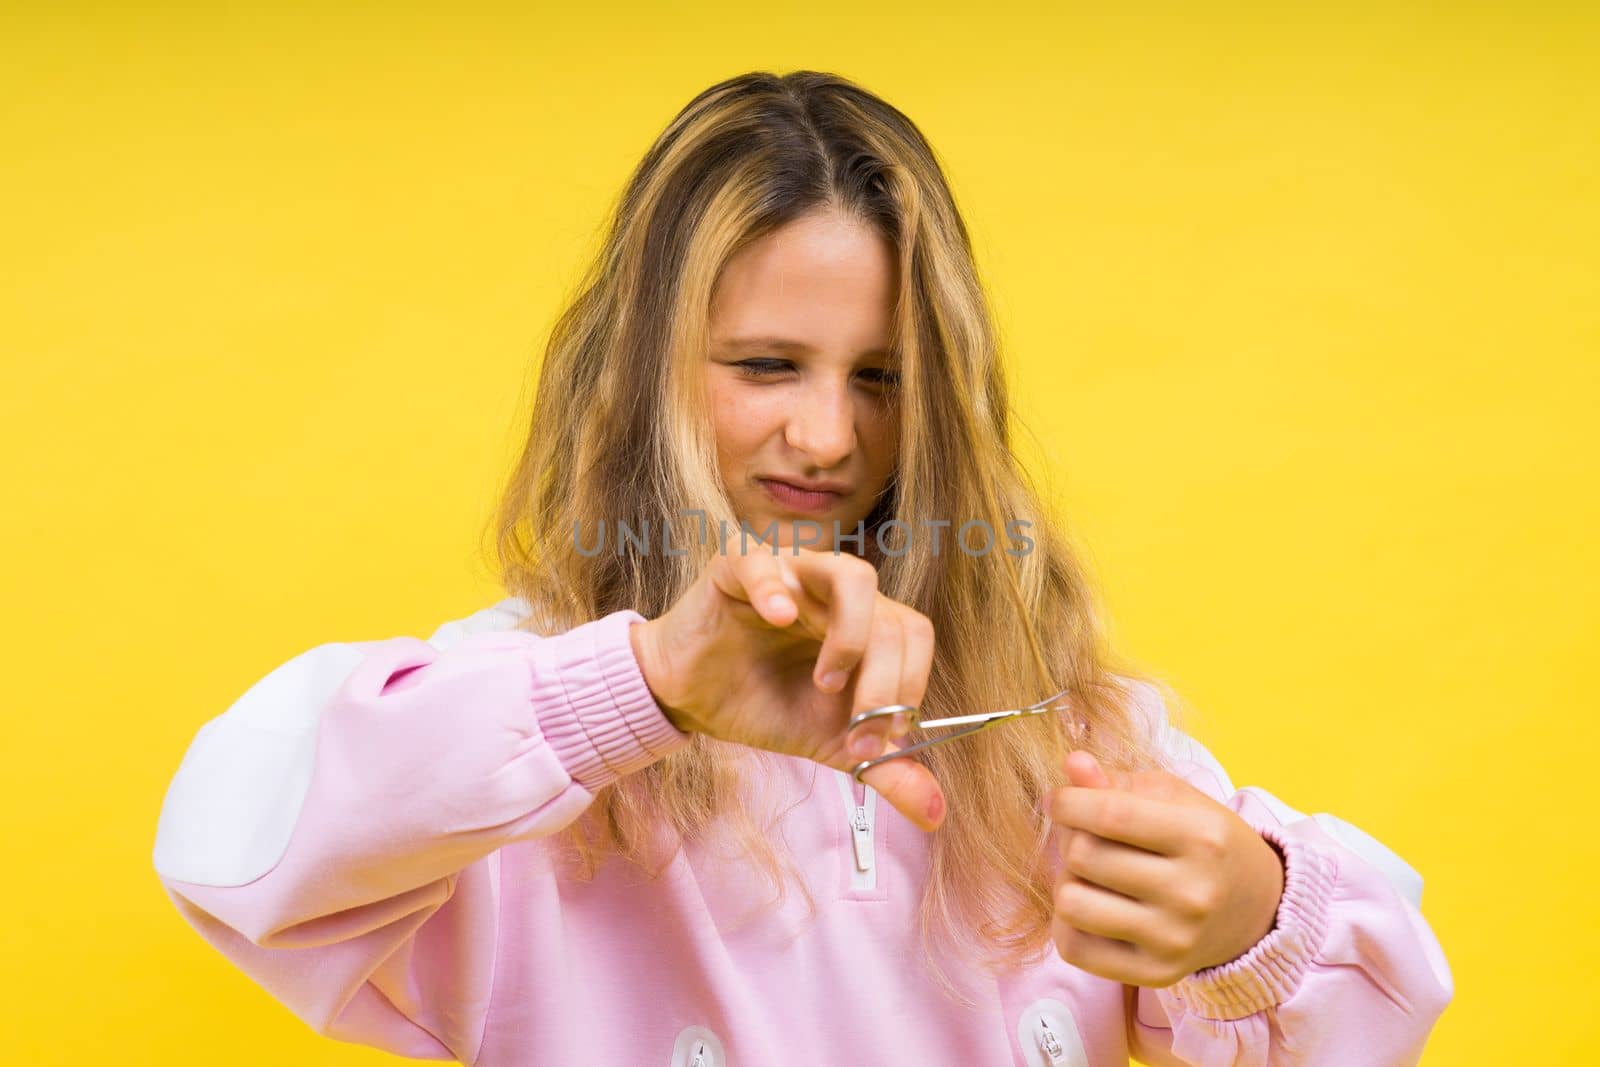 Child adorable girl hairdresser cutting long blonde hair with metallic scissors on yellow by Zelenin